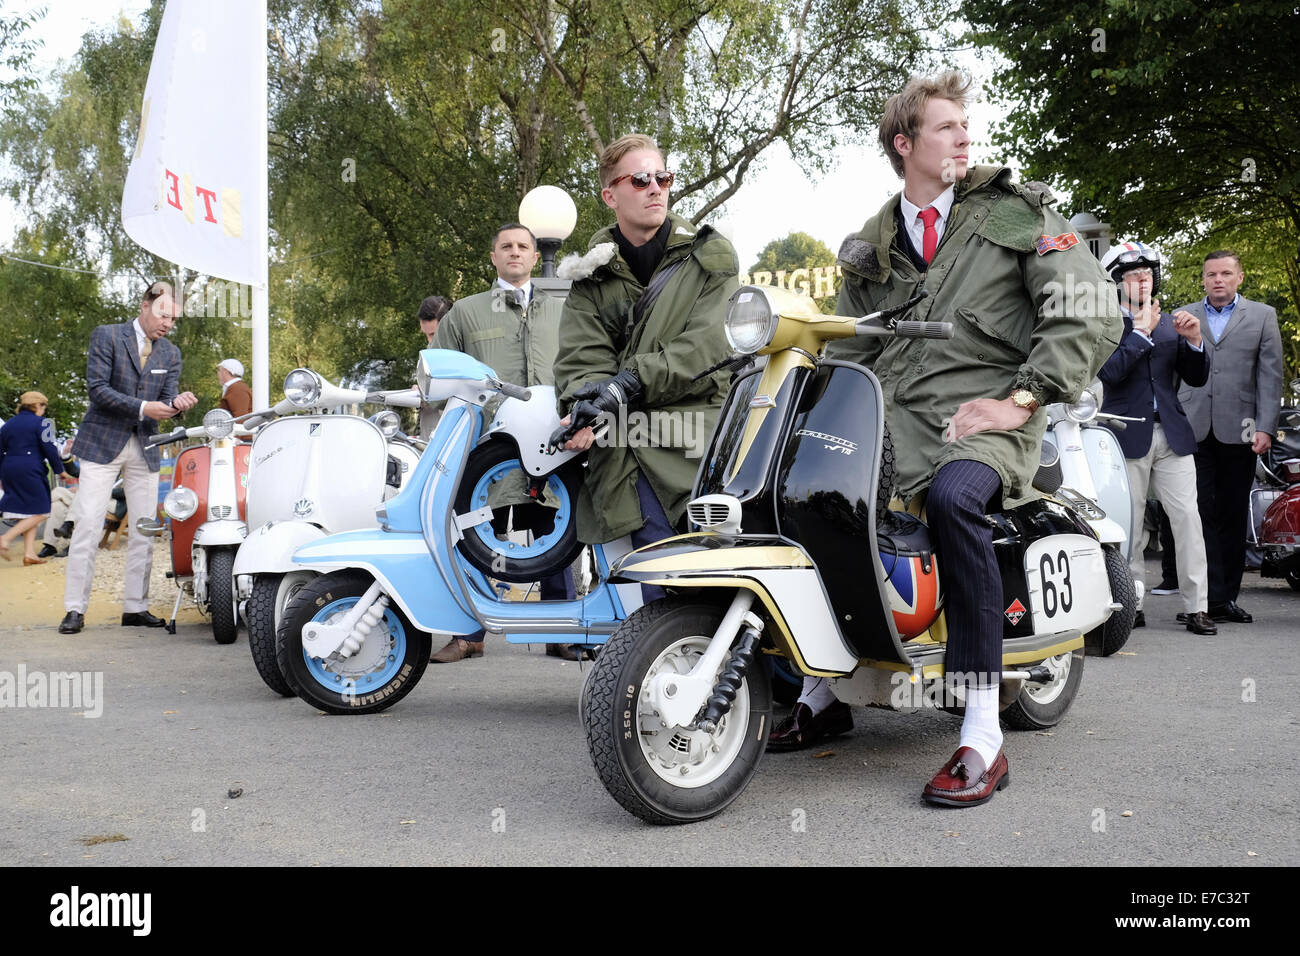 A group of young men twenties smartly dressed as mods and are wearing parkas staypress trousers and loafer shoes are sitting on italian styled lambretta and vespa motor scooters whilst attending the . 2014. Goodwood revival event at the goodwood motor circuit near chichester in west sussex uk,  The Goodwood revival offers some superb motor racing action on the circuit and entertainment for all of the family in the grounds, spectators are encouraged to dress in period and vintage clothing and become part of the event. Stock Photo